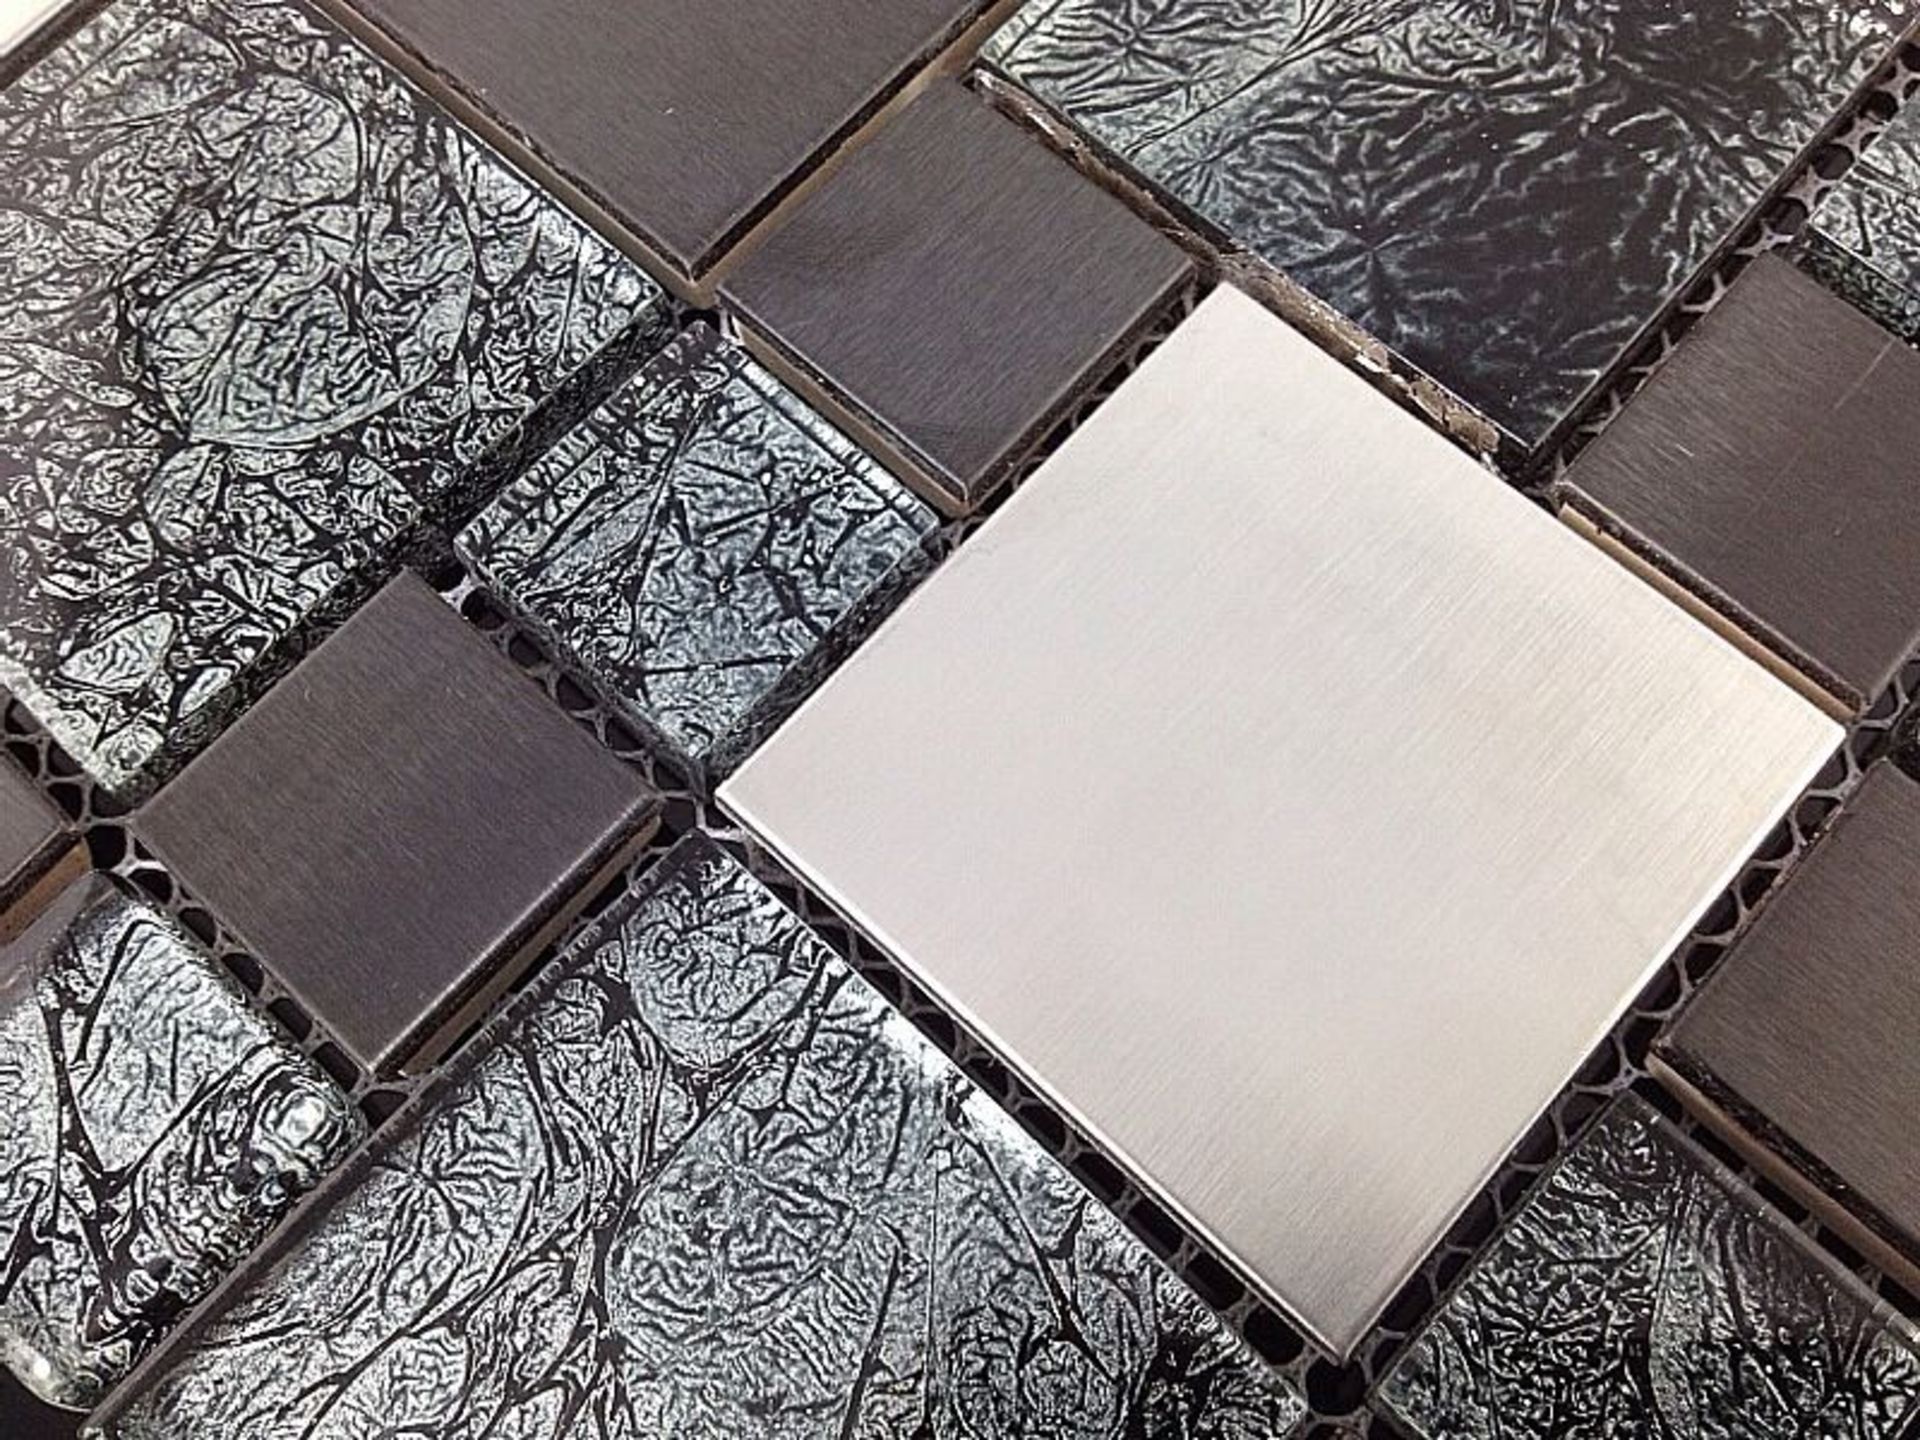 10 Square Metres - High Quality Glass/Stainless Steel Mosaic Tiles - Image 4 of 5